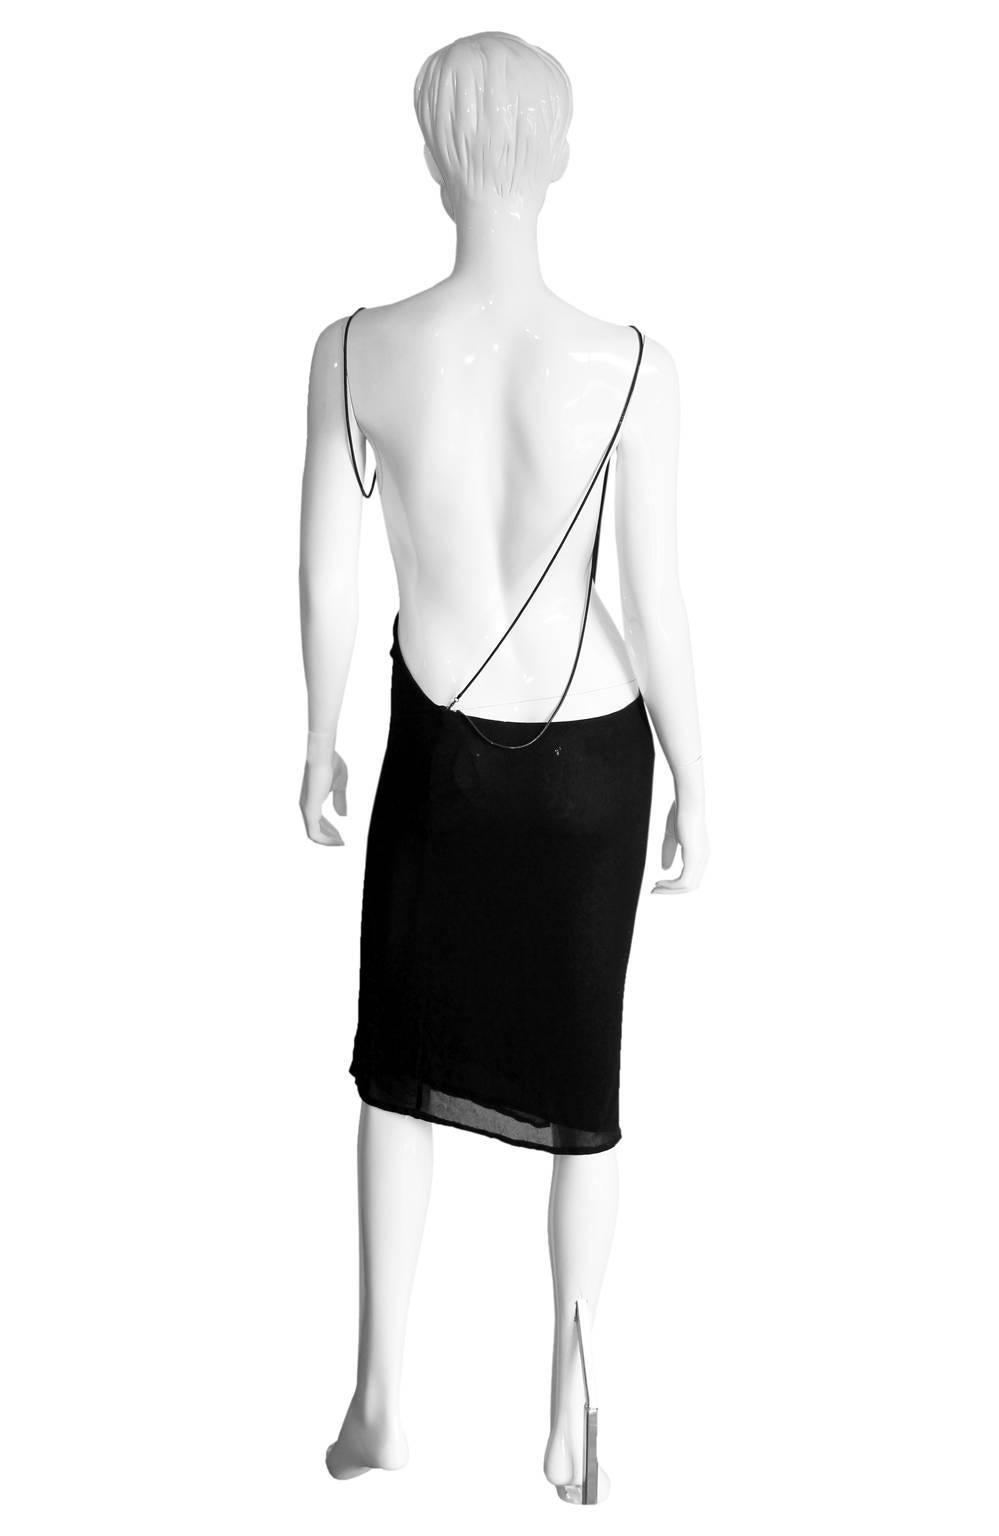 Uber-Rare & Utterly Iconic Tom Ford For Gucci Spring Summer 1997 Backless Knit Dress With Those Heavenly Chain Straps!

This gorgeous dress is an italian size 42 & fits a US size 4-6 beautifully, & it's in lovely condition with only